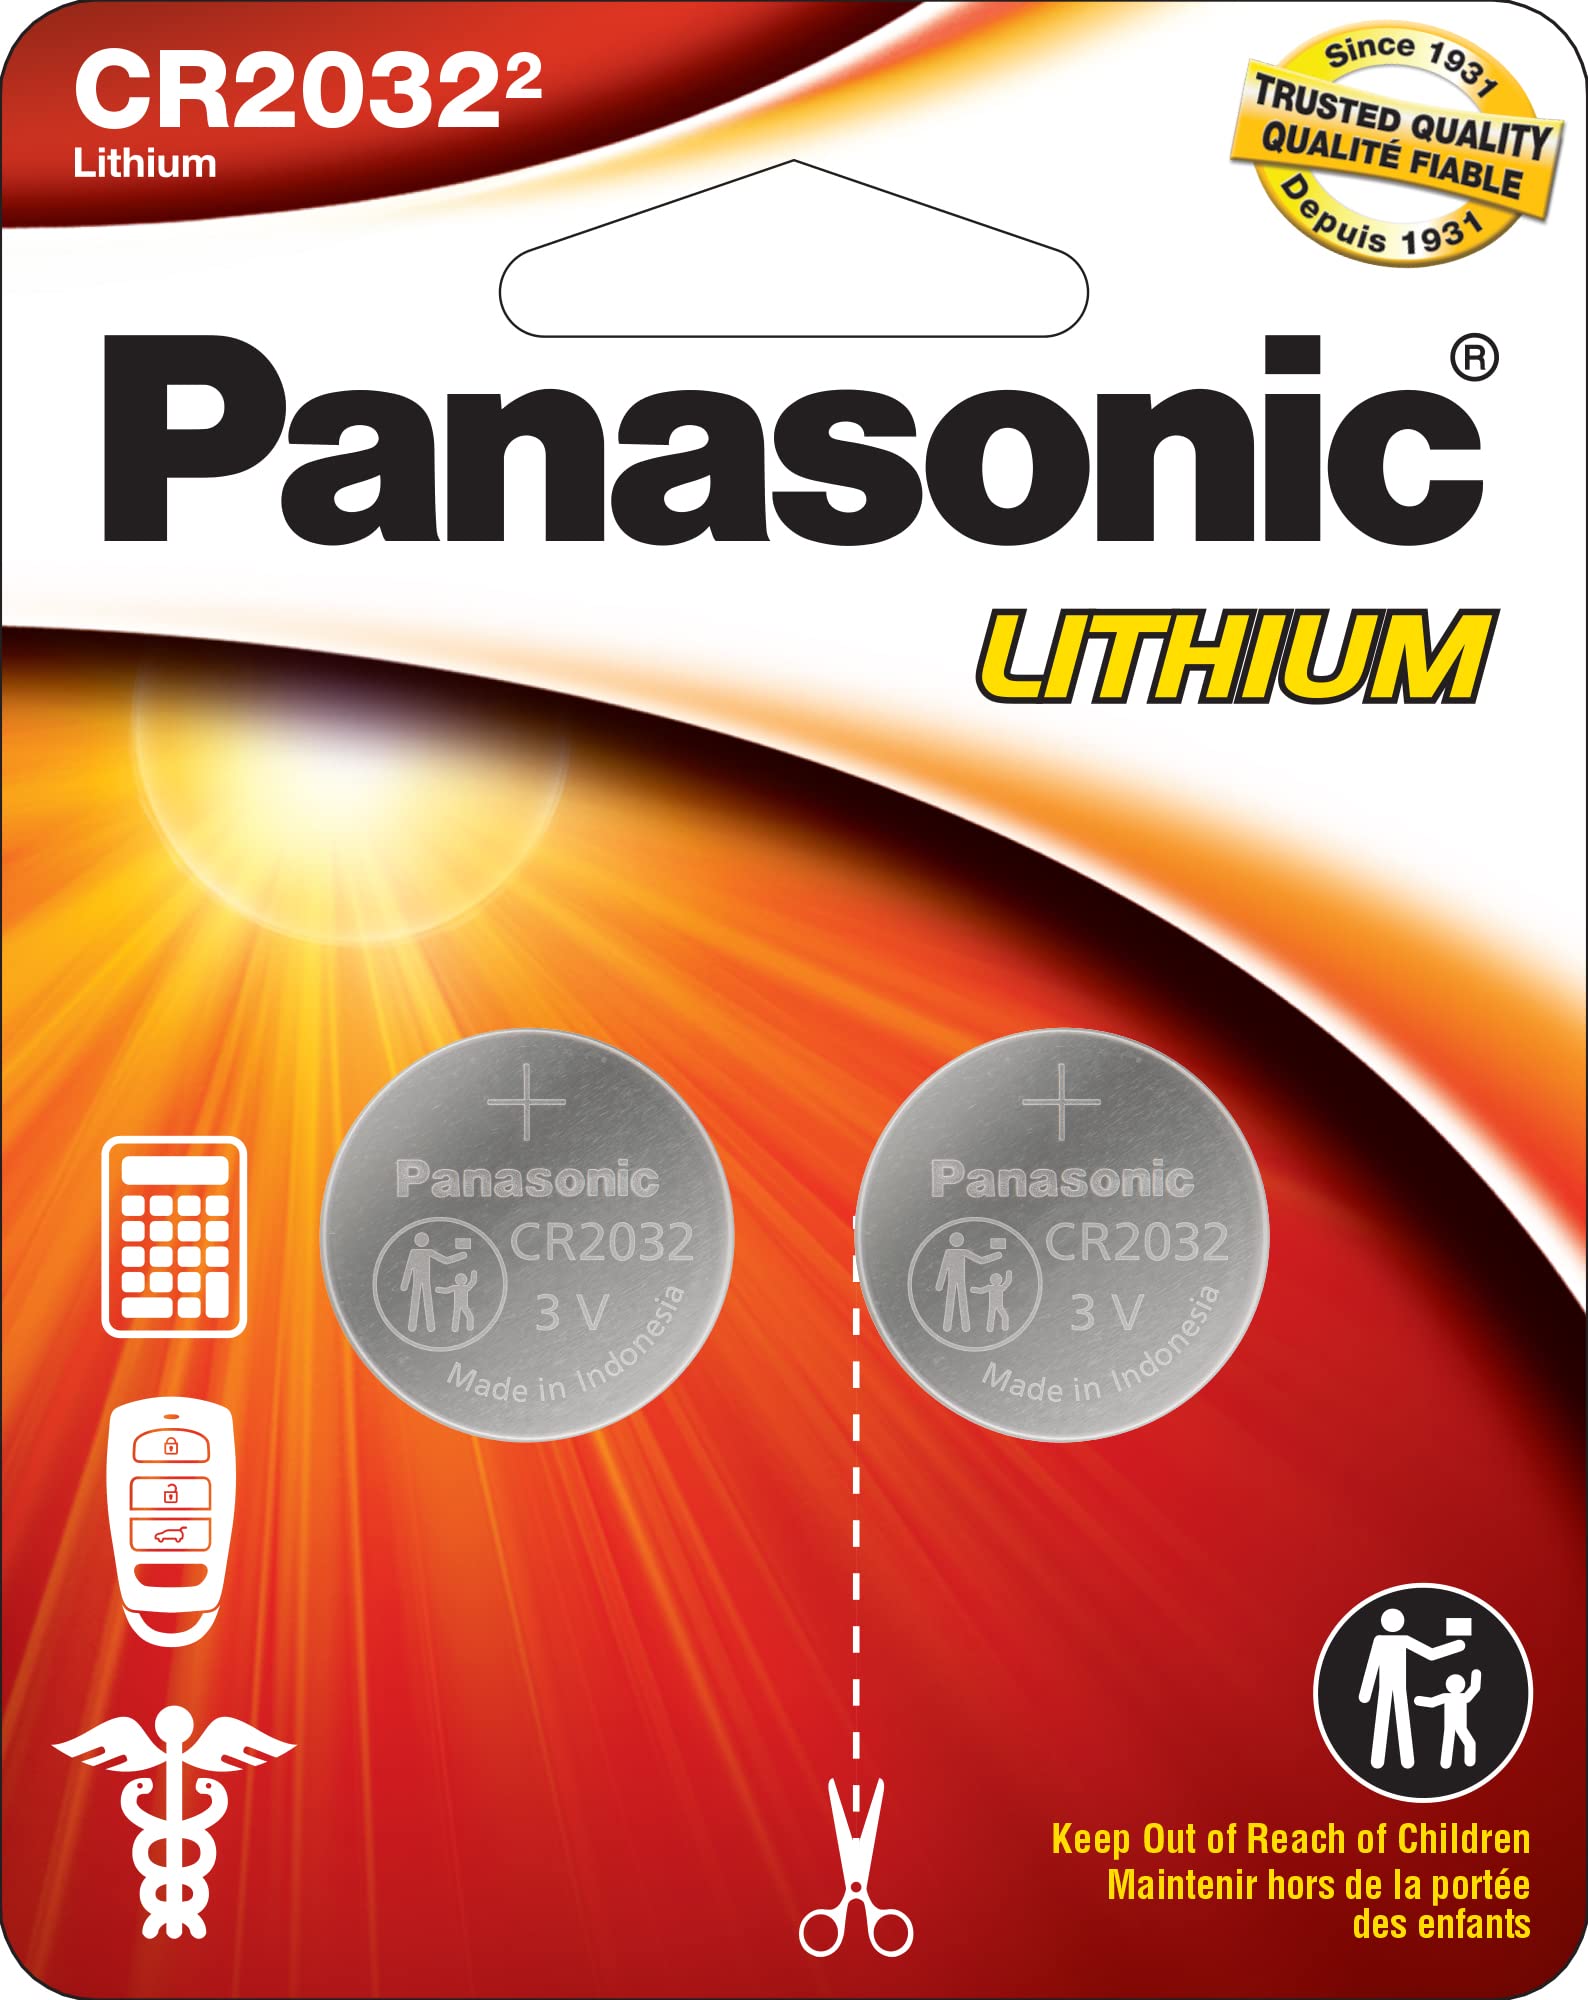 Panasonic CR2032 3.0 Volt Long Lasting Lithium Coin Cell Batteries in Child Resistant, Standards Based Packaging, 2-Battery Pack